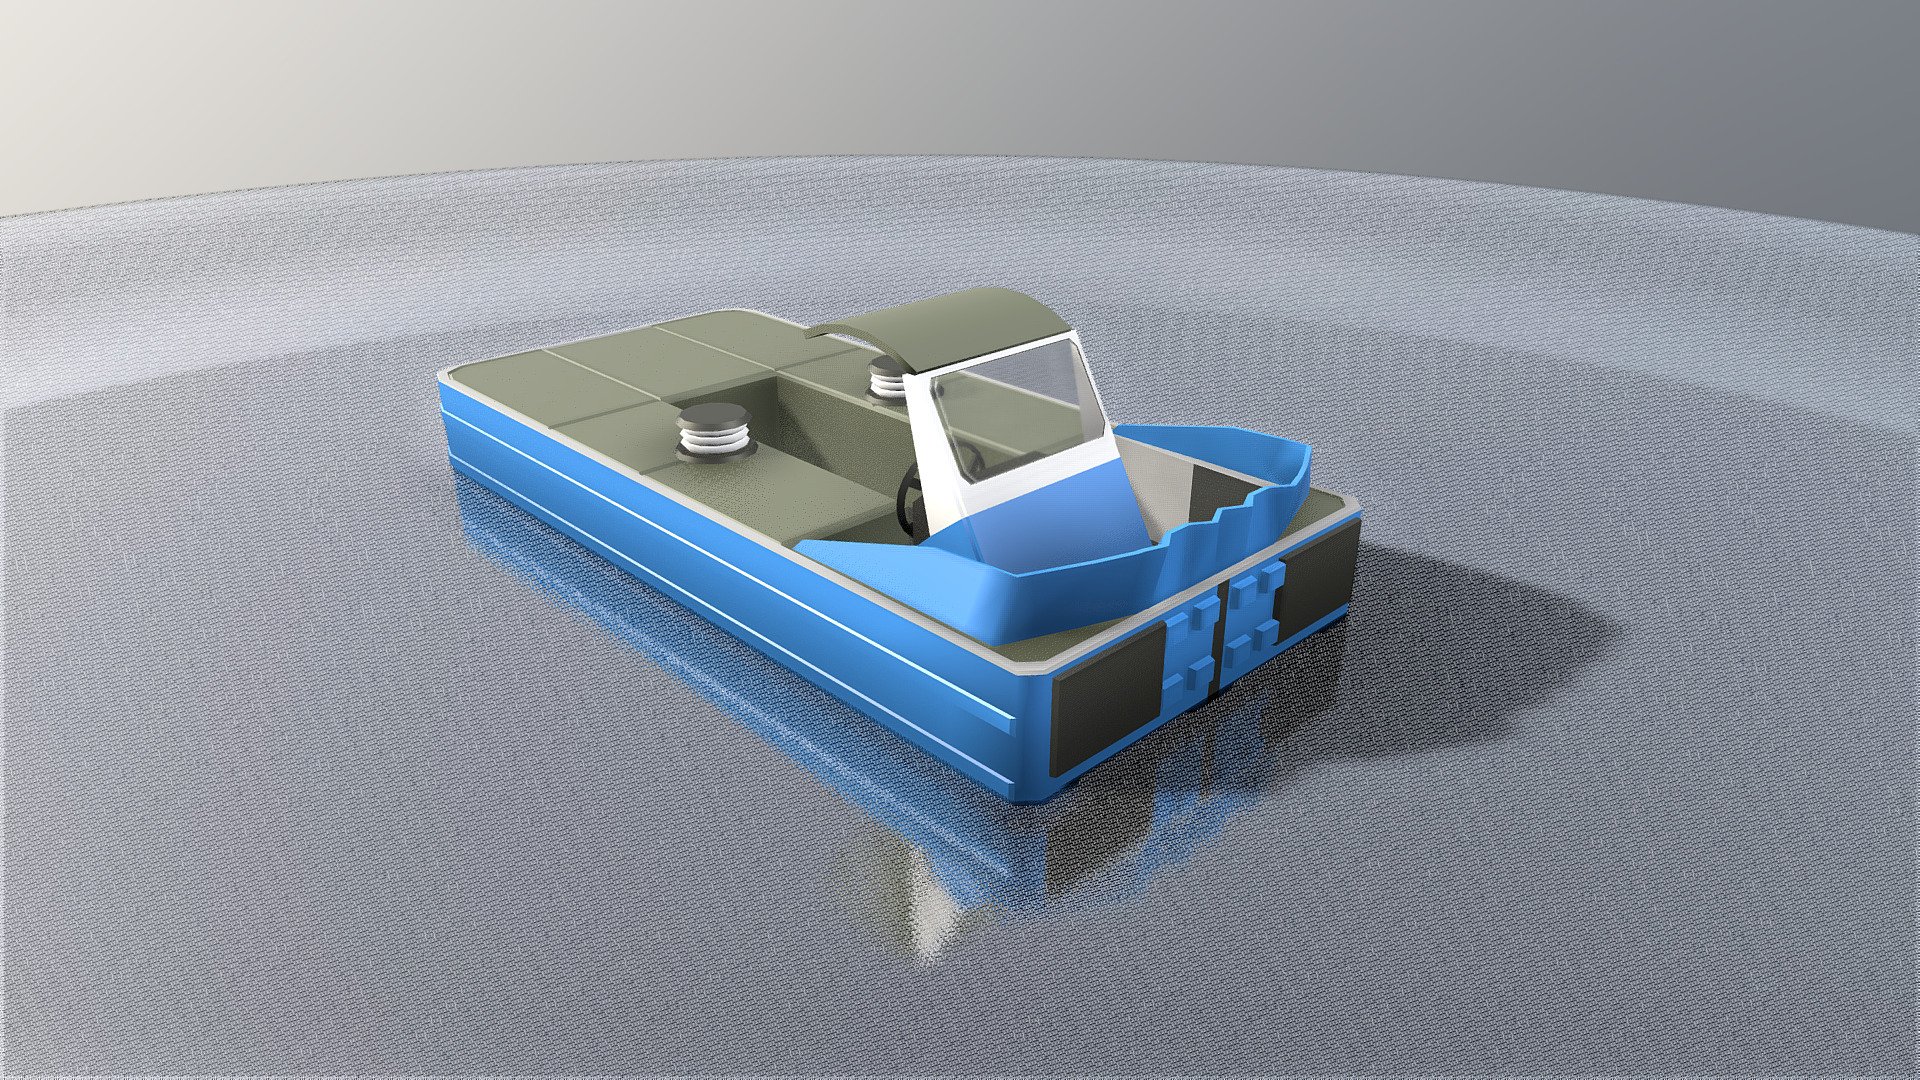 The small towboat (Schottel M Boot 3) from our Demolition Visualization Scenes 3d model